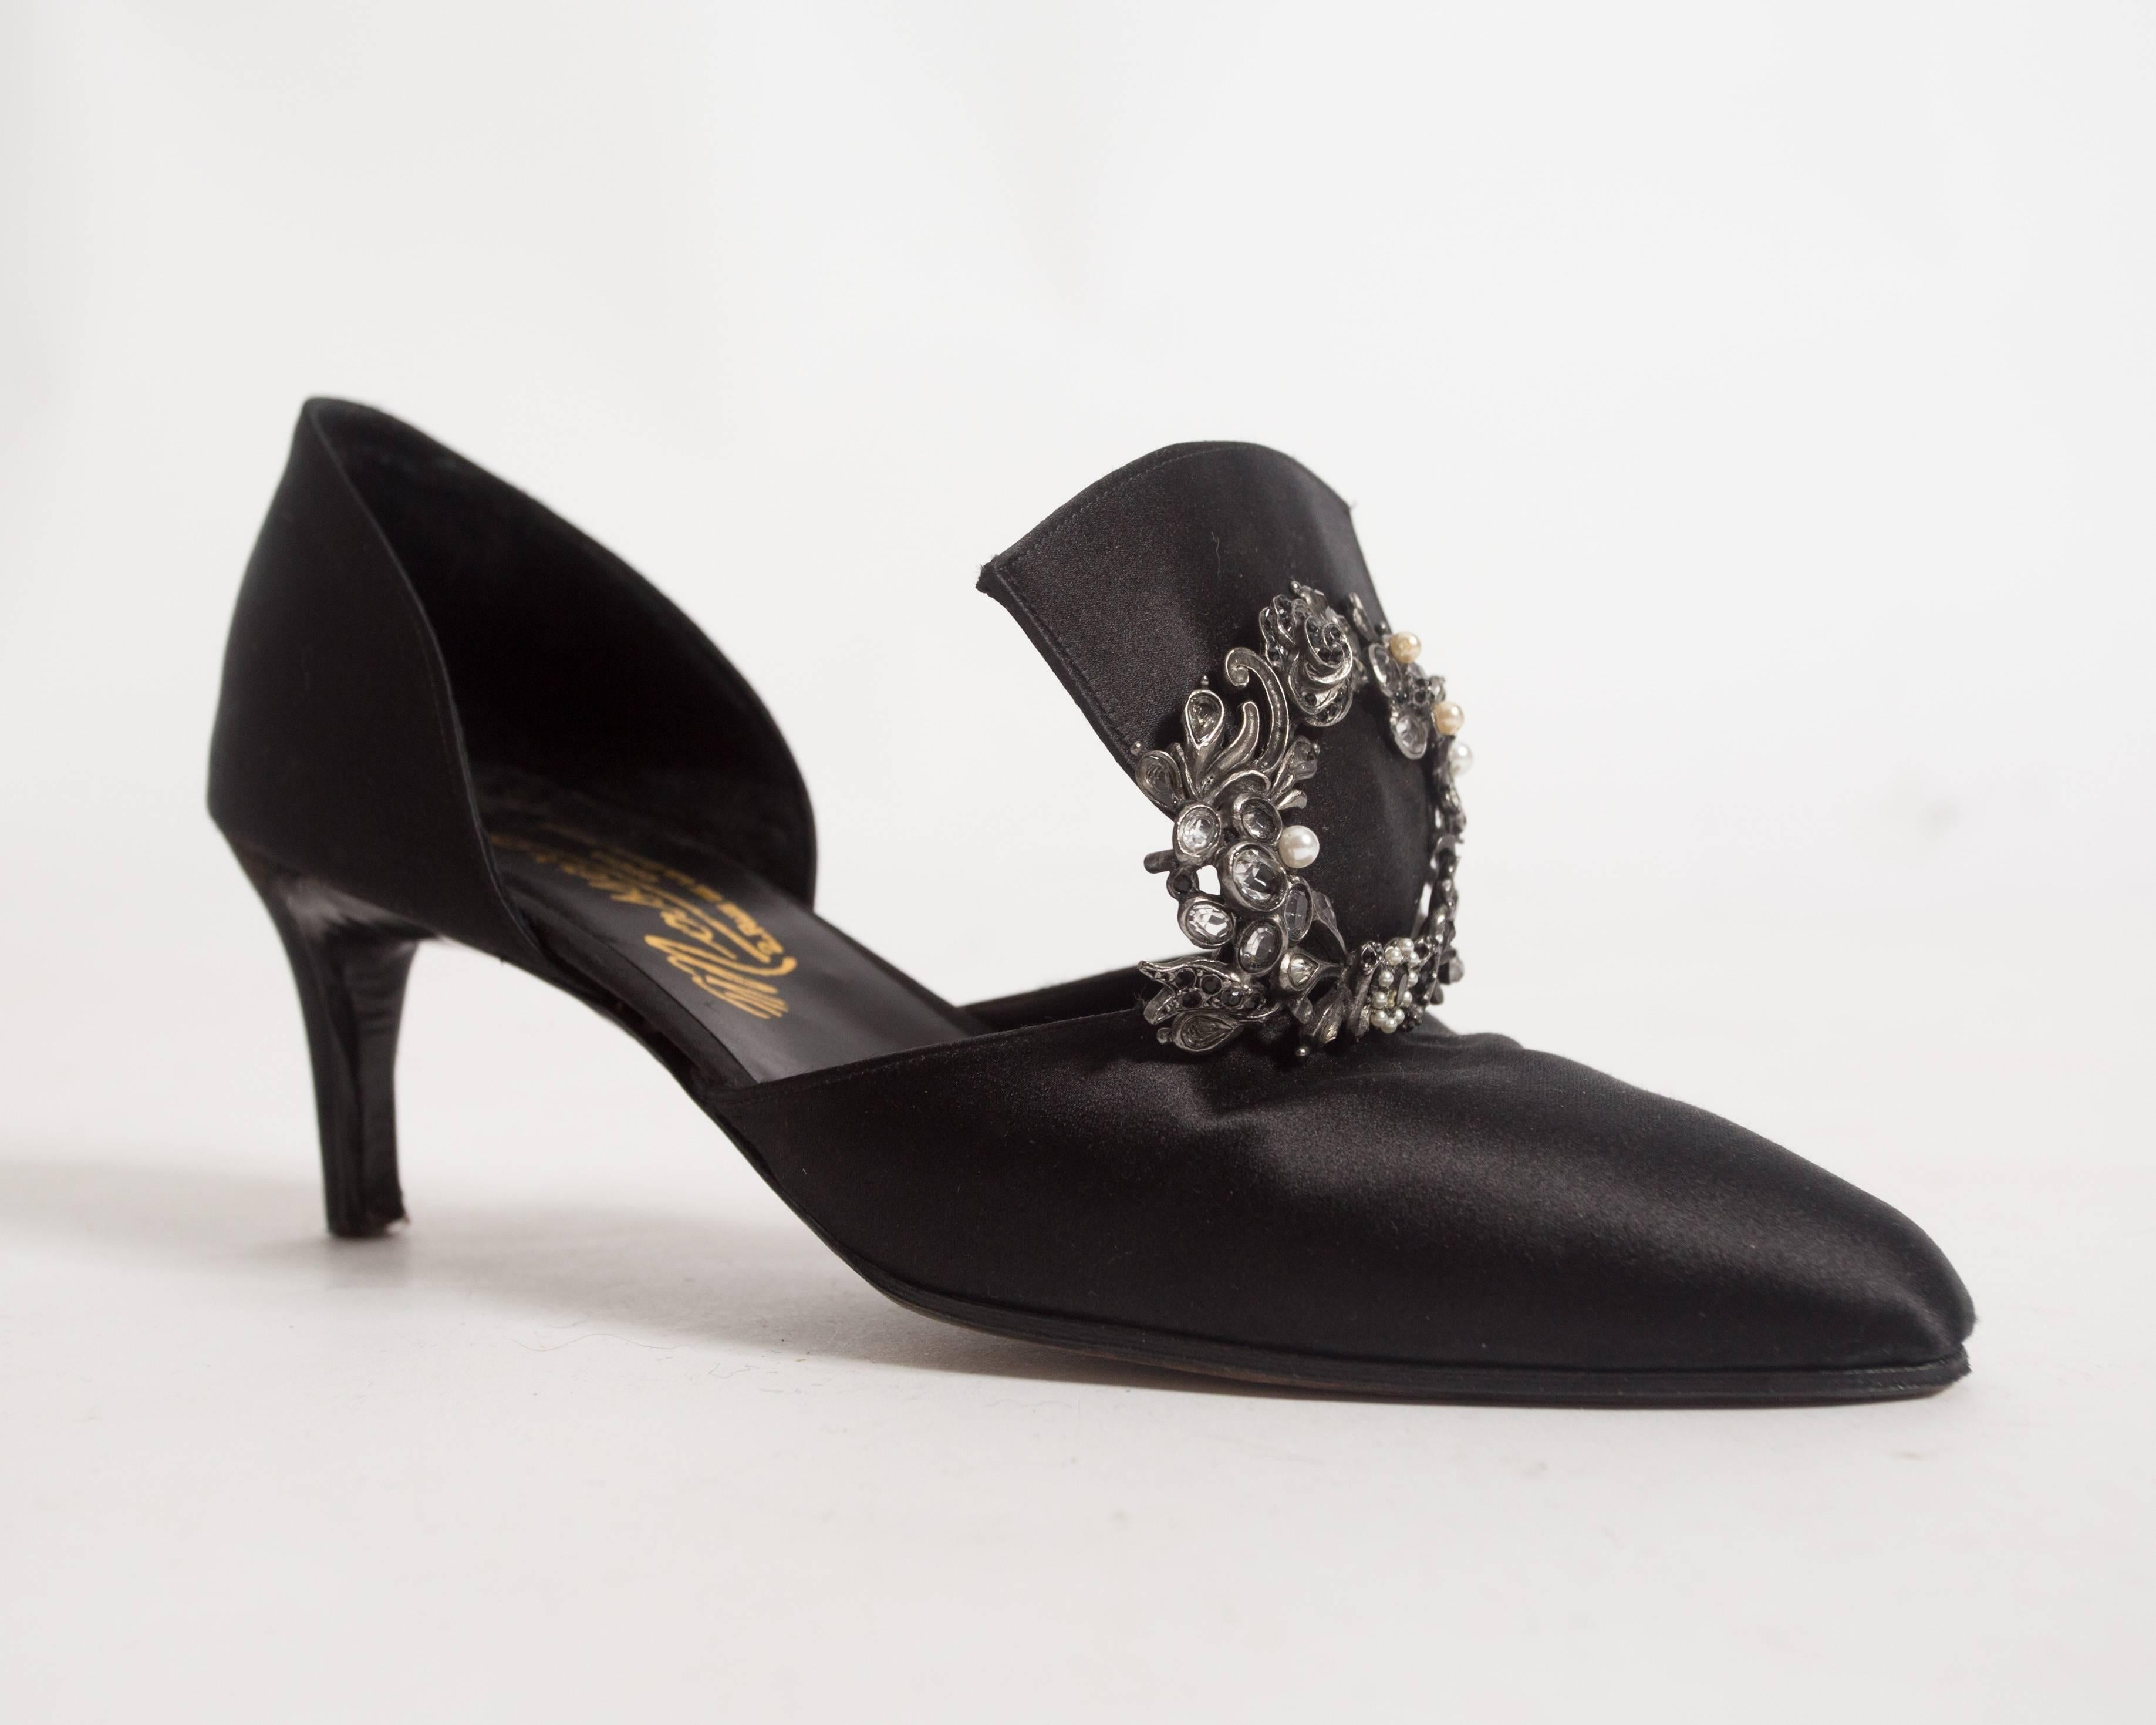 Chanel Haute Couture satin pumps with brooch by Massoro, circa 1950s 1